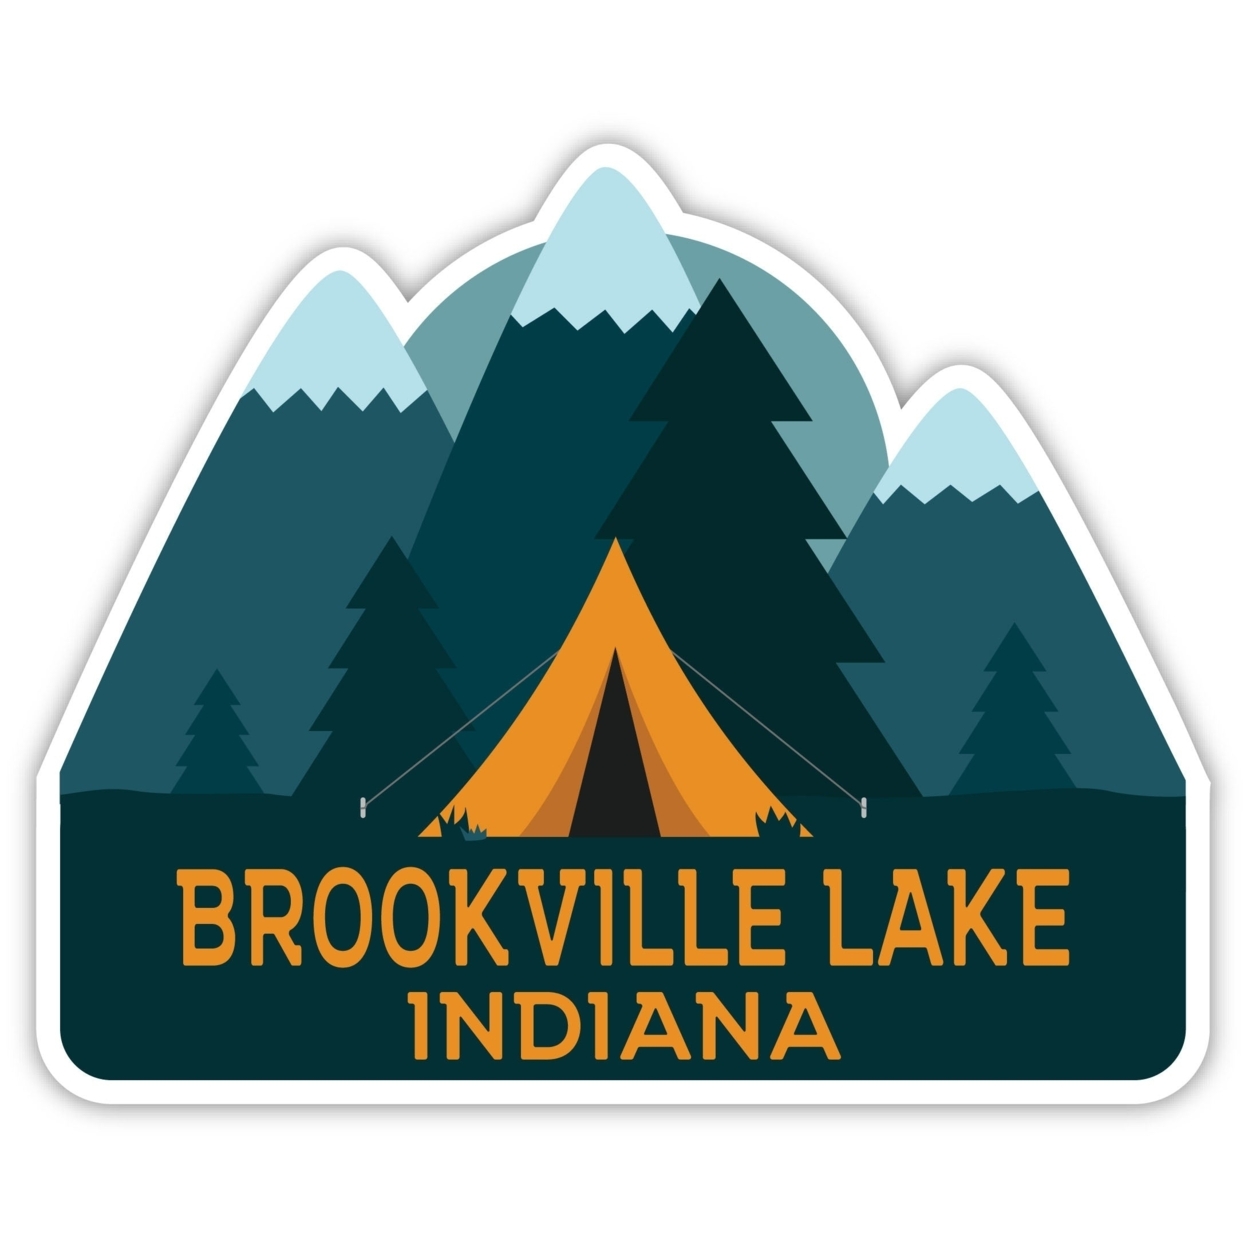 Brookville Lake Indiana Souvenir Decorative Stickers (Choose Theme And Size) - 4-Pack, 4-Inch, Tent